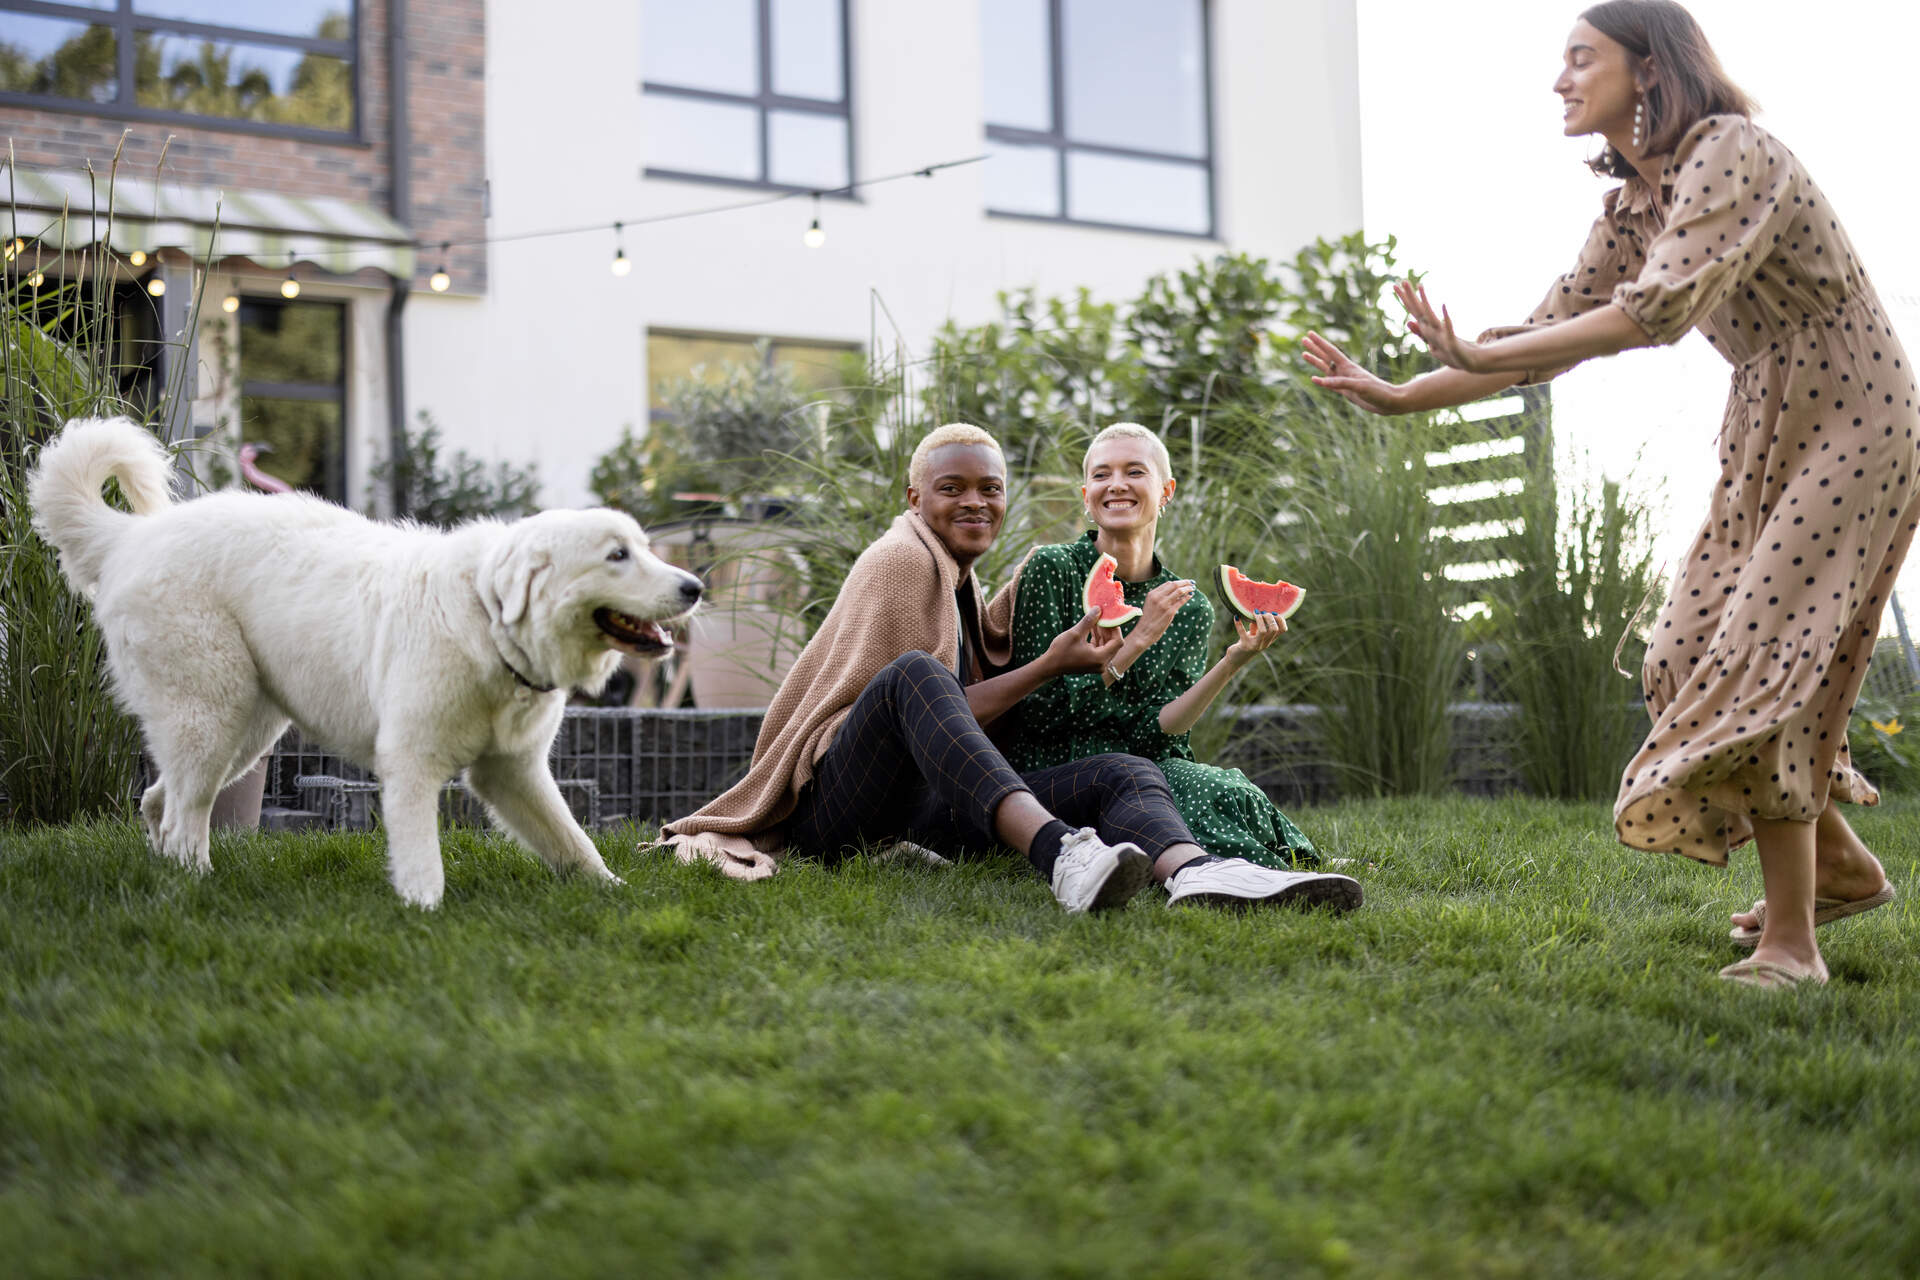 A group of people playing with a dog in a garden